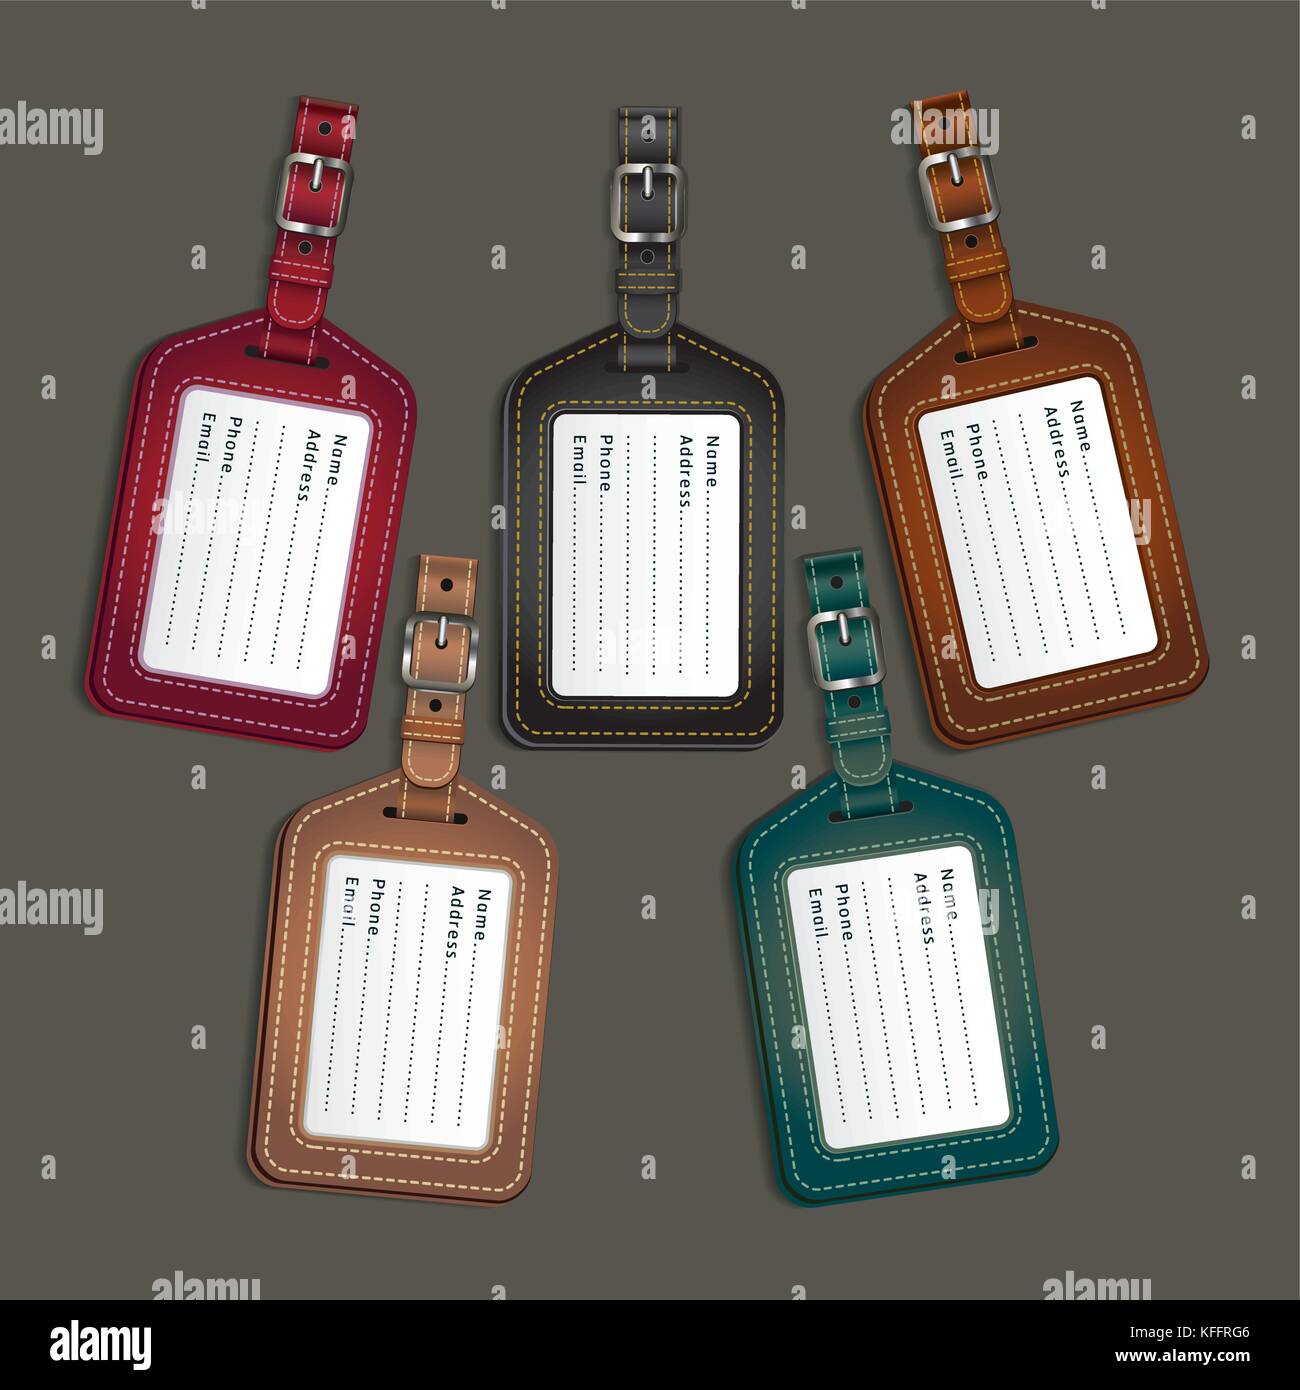 Luggage Tag B - SDF Louisville Kentucky USA Poster by neotokyo